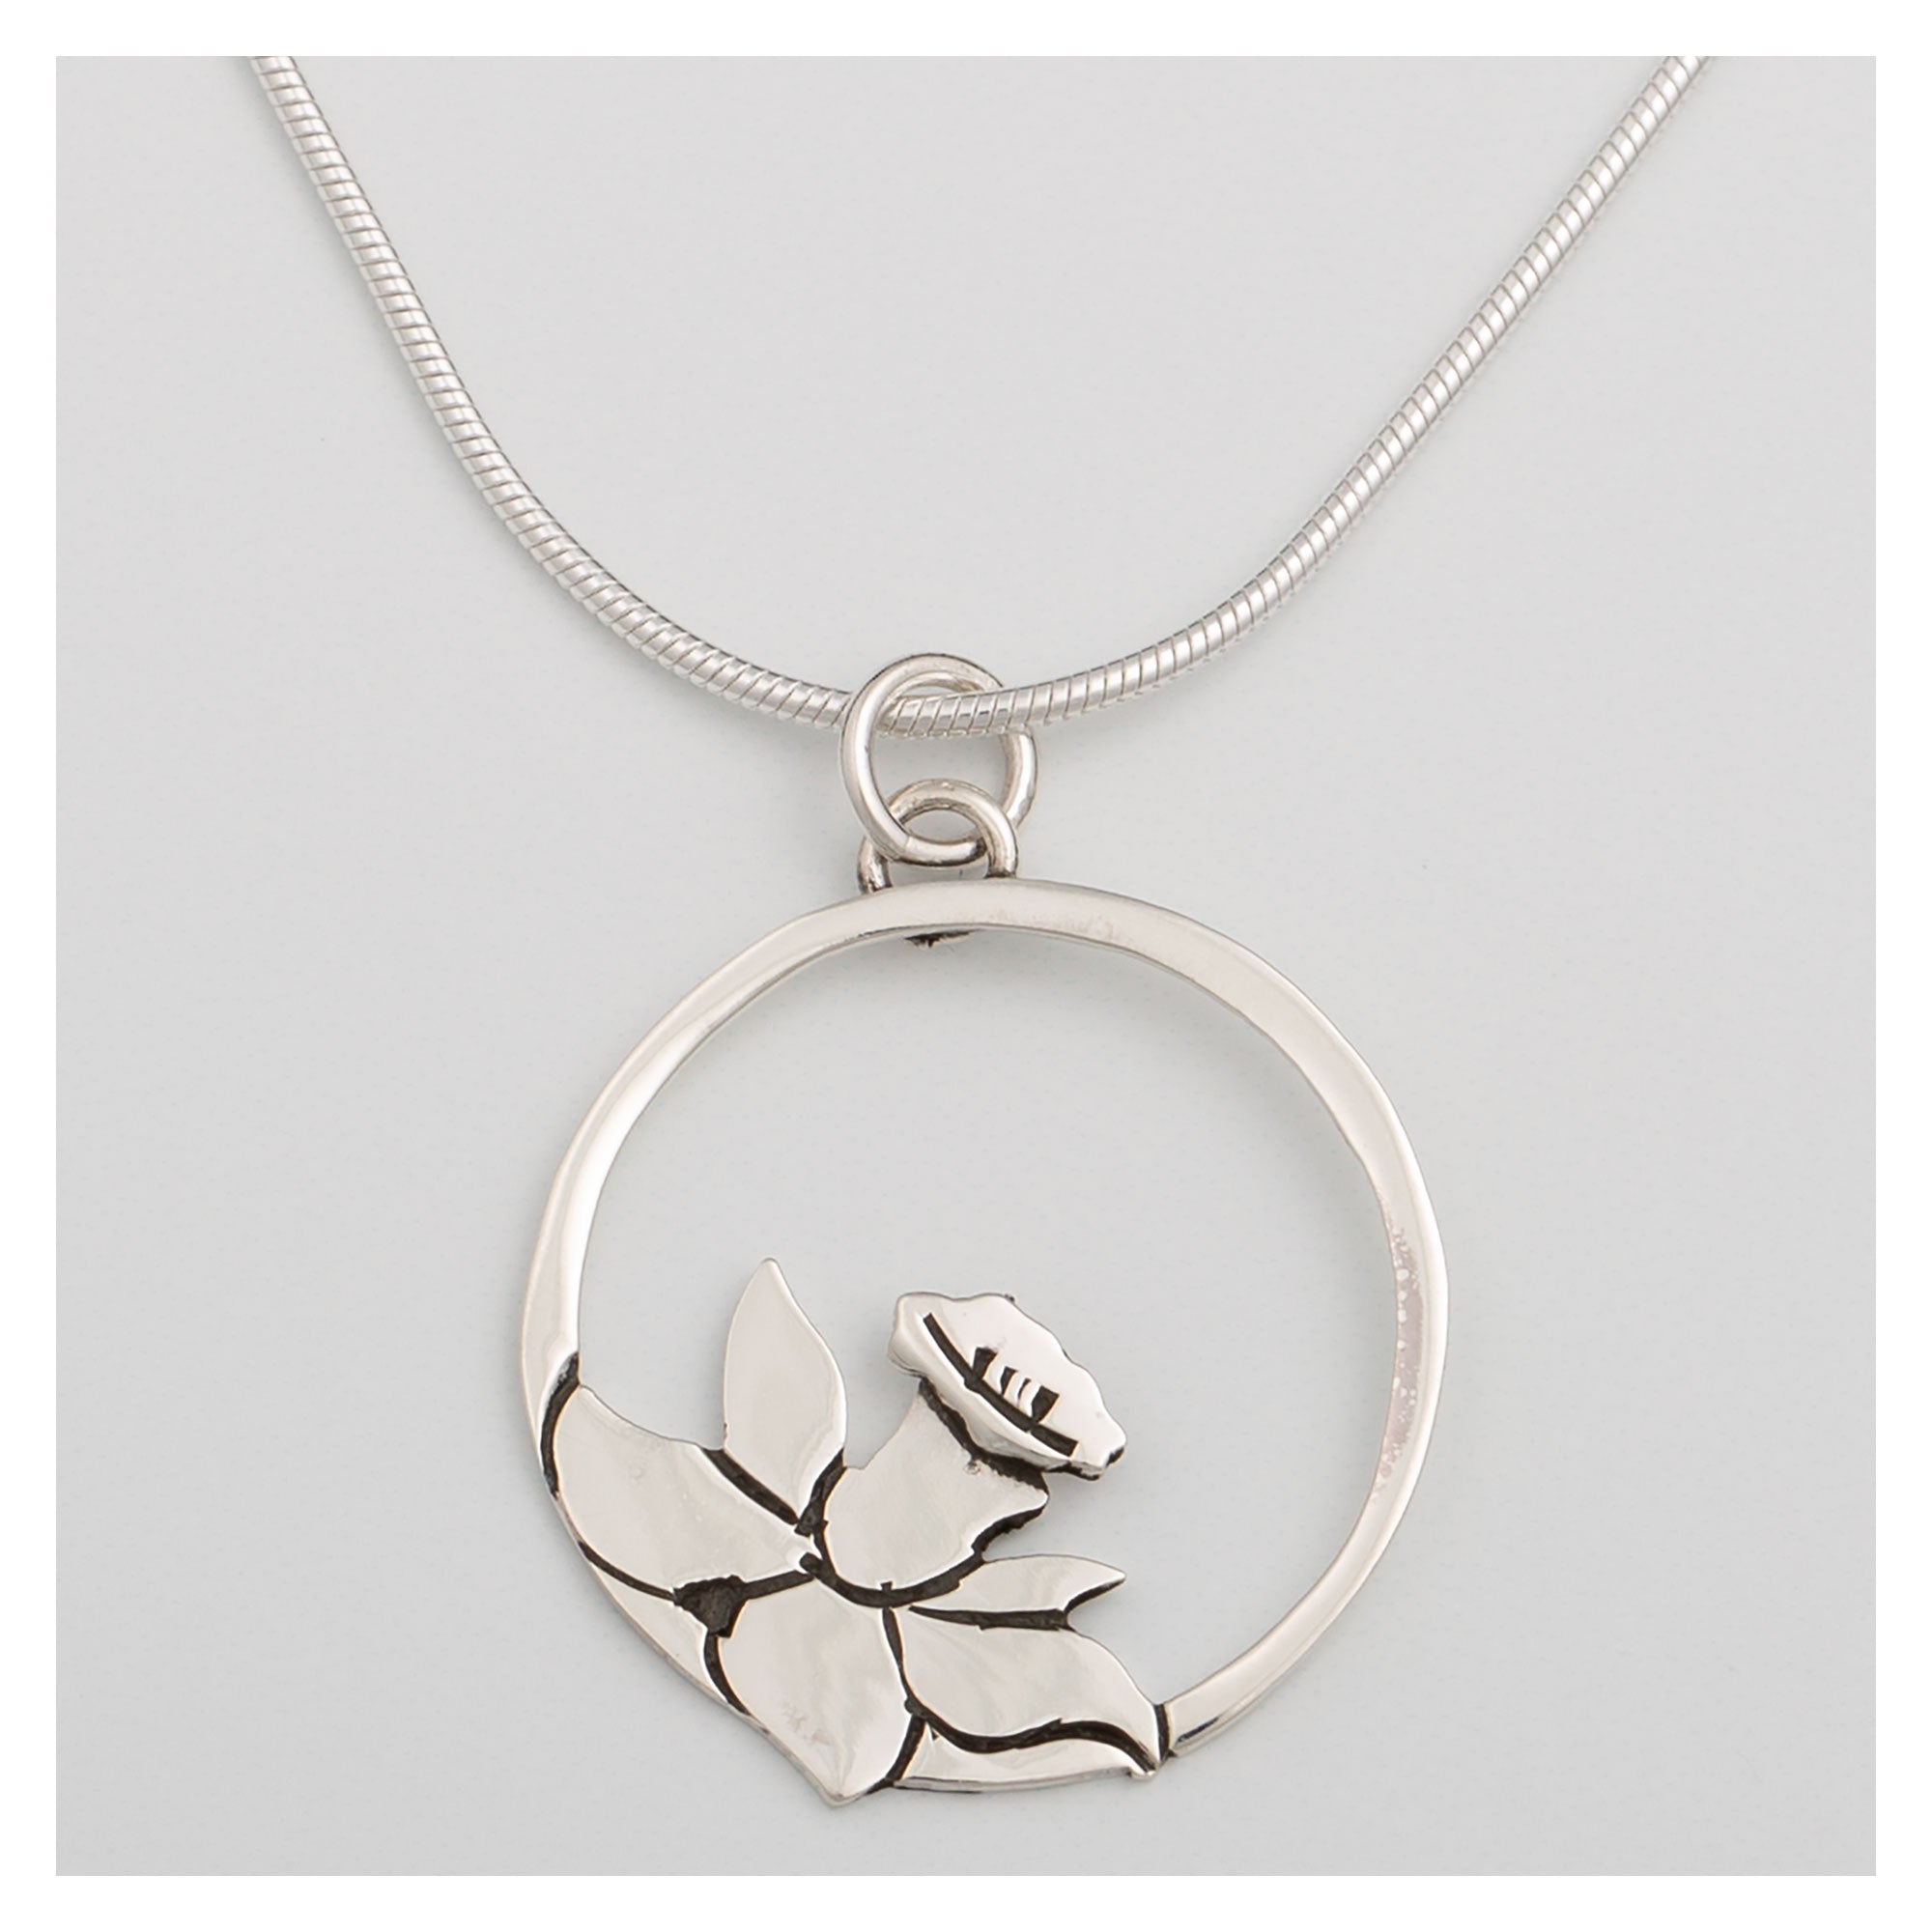 Blooming Flowers Sterling Necklace - Daffodil - Pendant Only